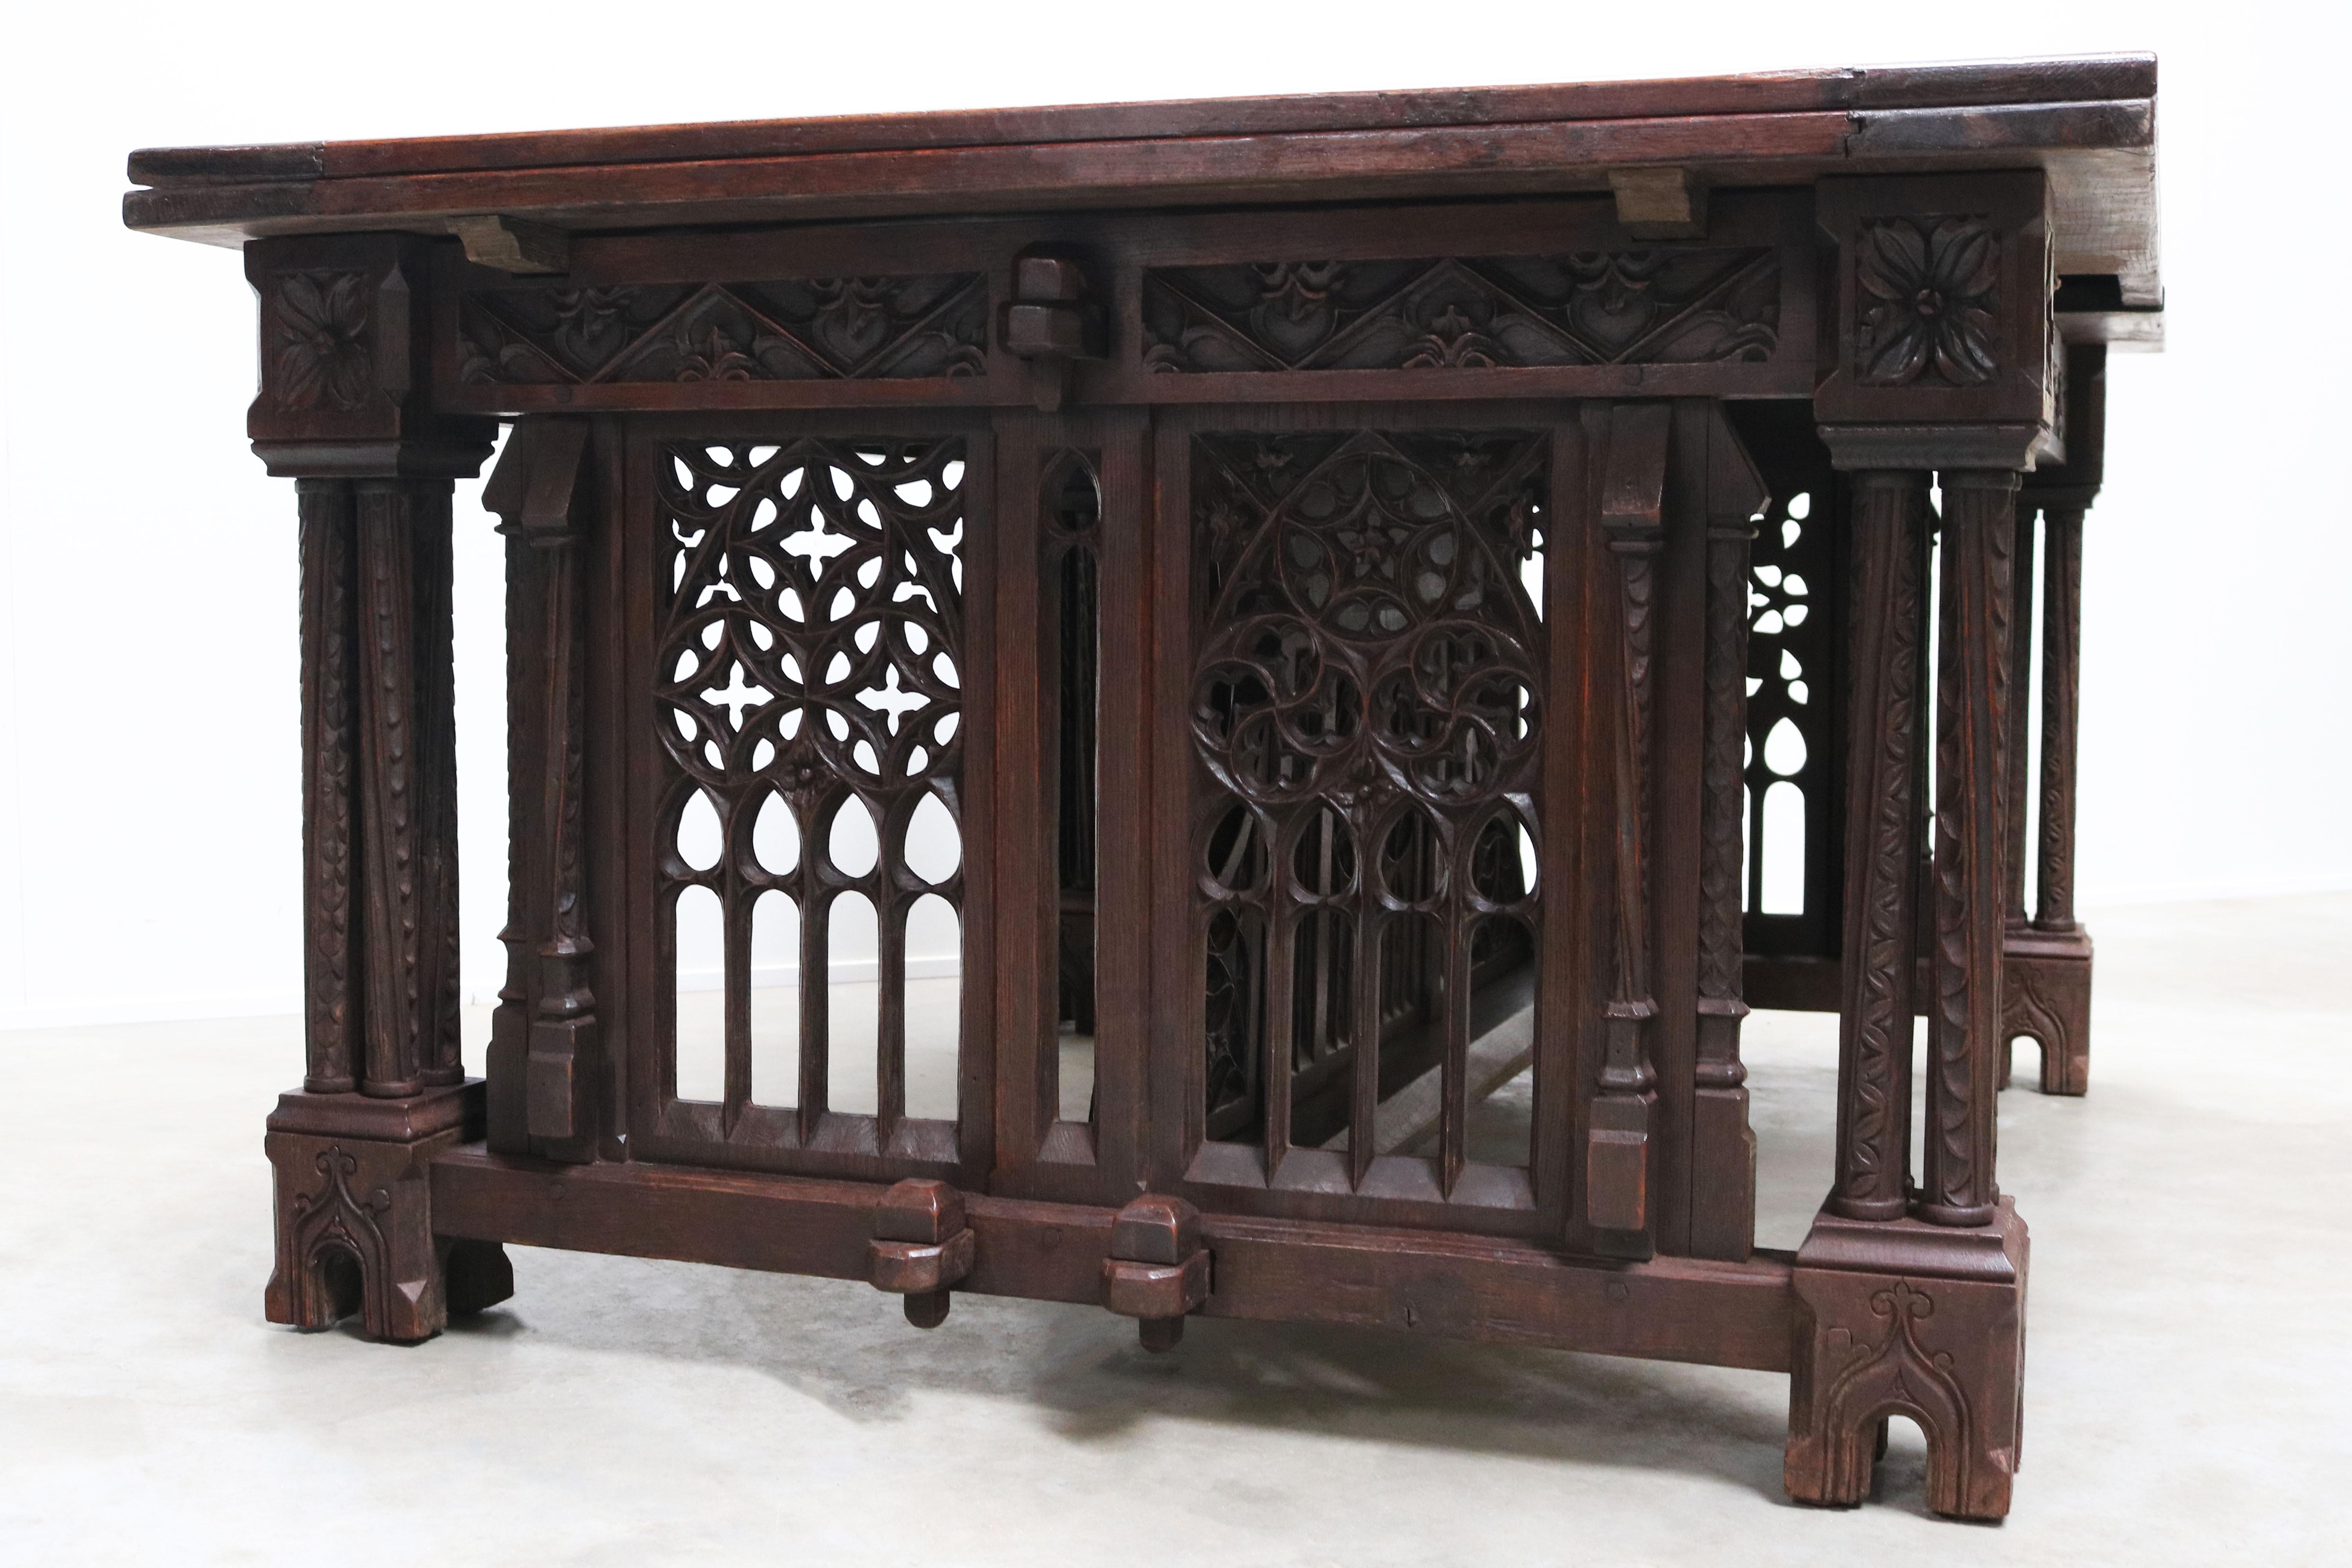 Step back in time with our exquisite Gothic Revival Monastery Table, crafted in 870 from European Oak wood. This striking piece is made for those who appreciate the old-world charm of Gothic architecture and the intricate details and feeling of